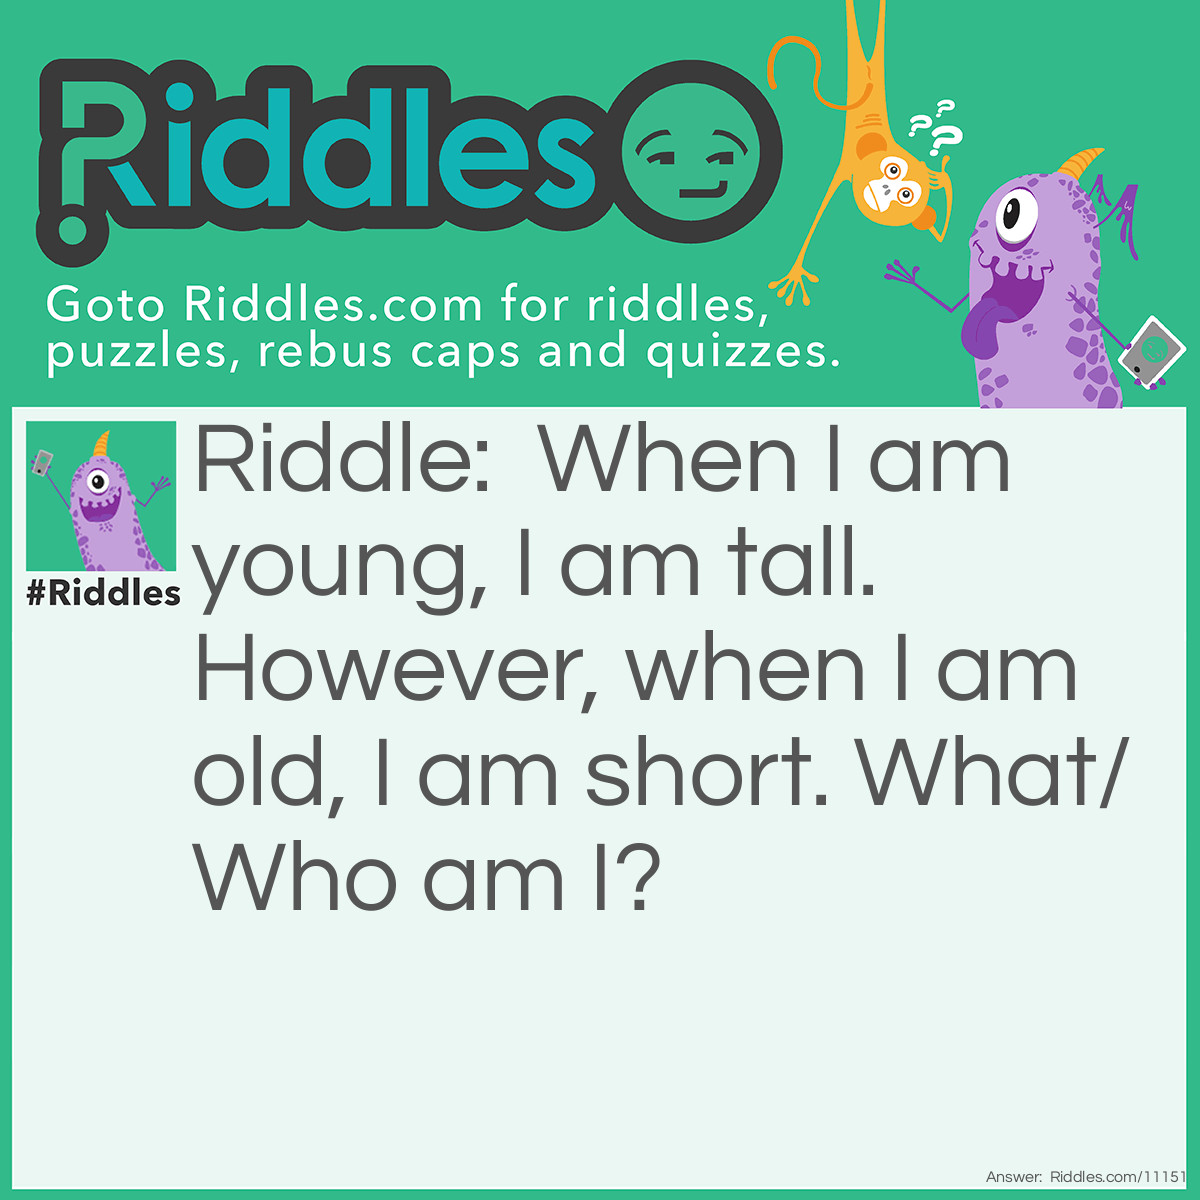 Riddle: When I am young, I am tall. However, when I am old, I am short. What/Who am I? Answer: A candle. When a candle is freshly lit, it is still tall, but when the candle has been used for a while, the wax melts and the candle gets smaller.